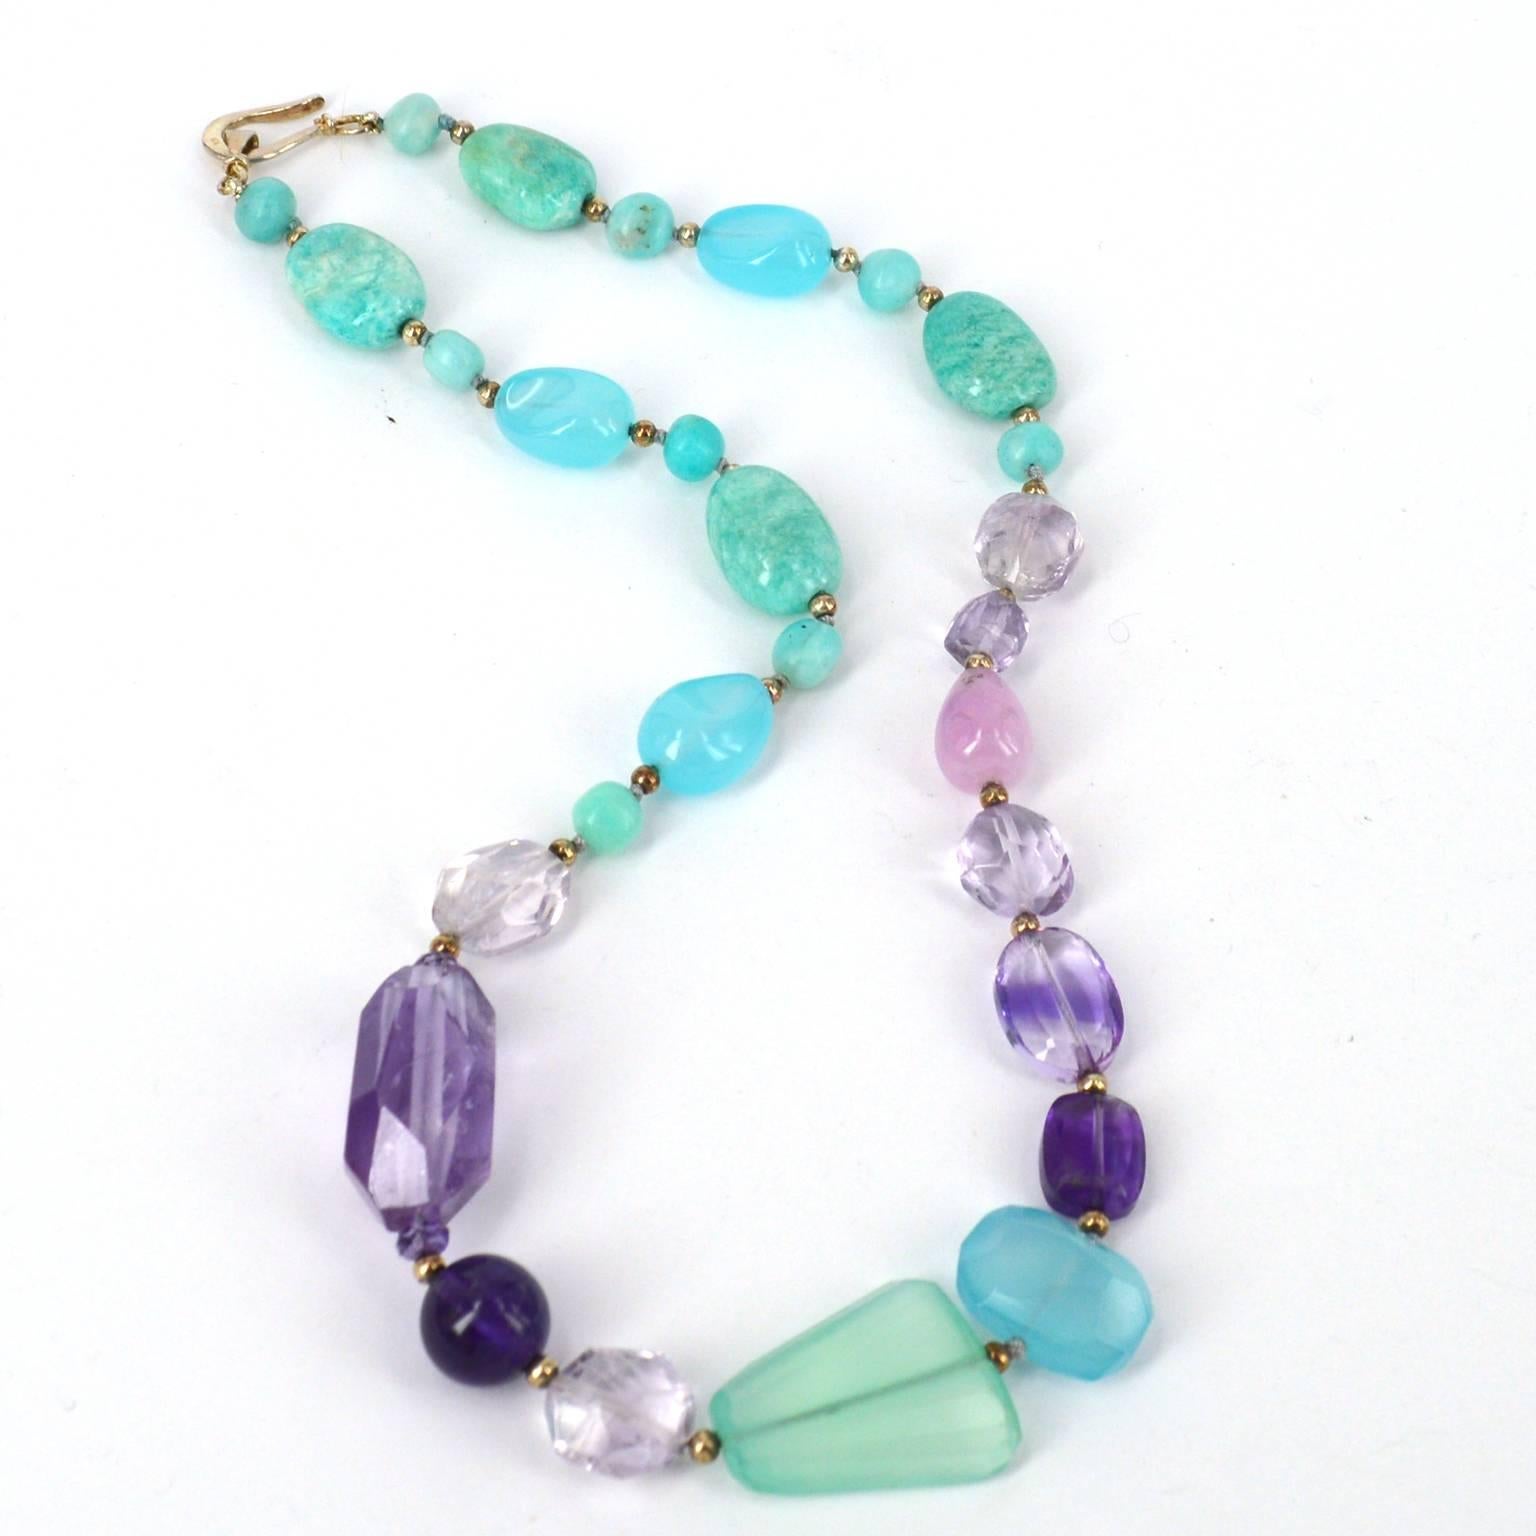 Aqua and Purple mix in together delicately in the pretty necklace.
Stones are a beautiful mix of Peruvian Amazonite, Chalcedony, Kunzite and Amethyst spaced with oxidised 3mm Sterling silver beads.
Necklace has been hand knotted on pale aqua